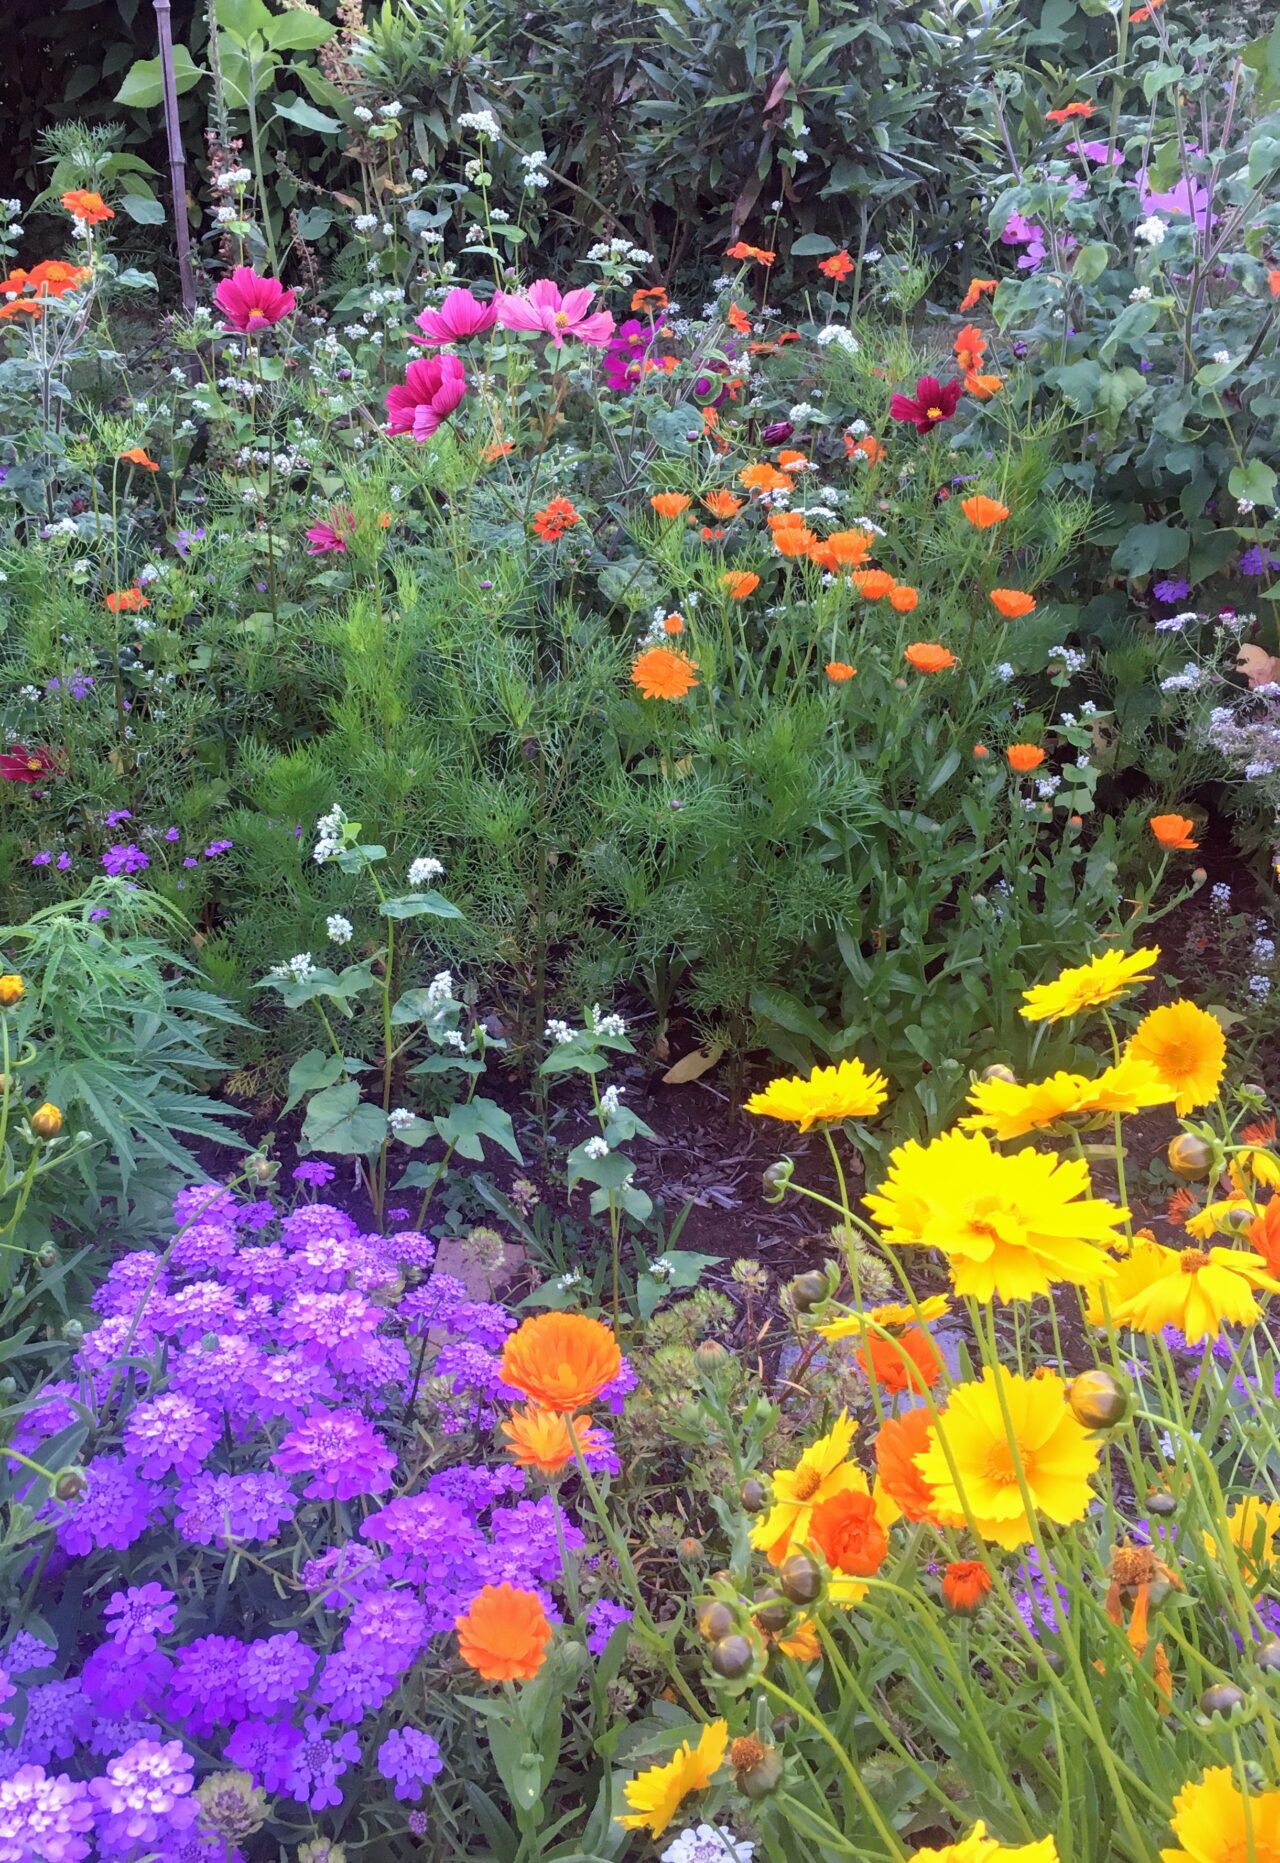 A range of yellow, purple and orange flowers in a garden